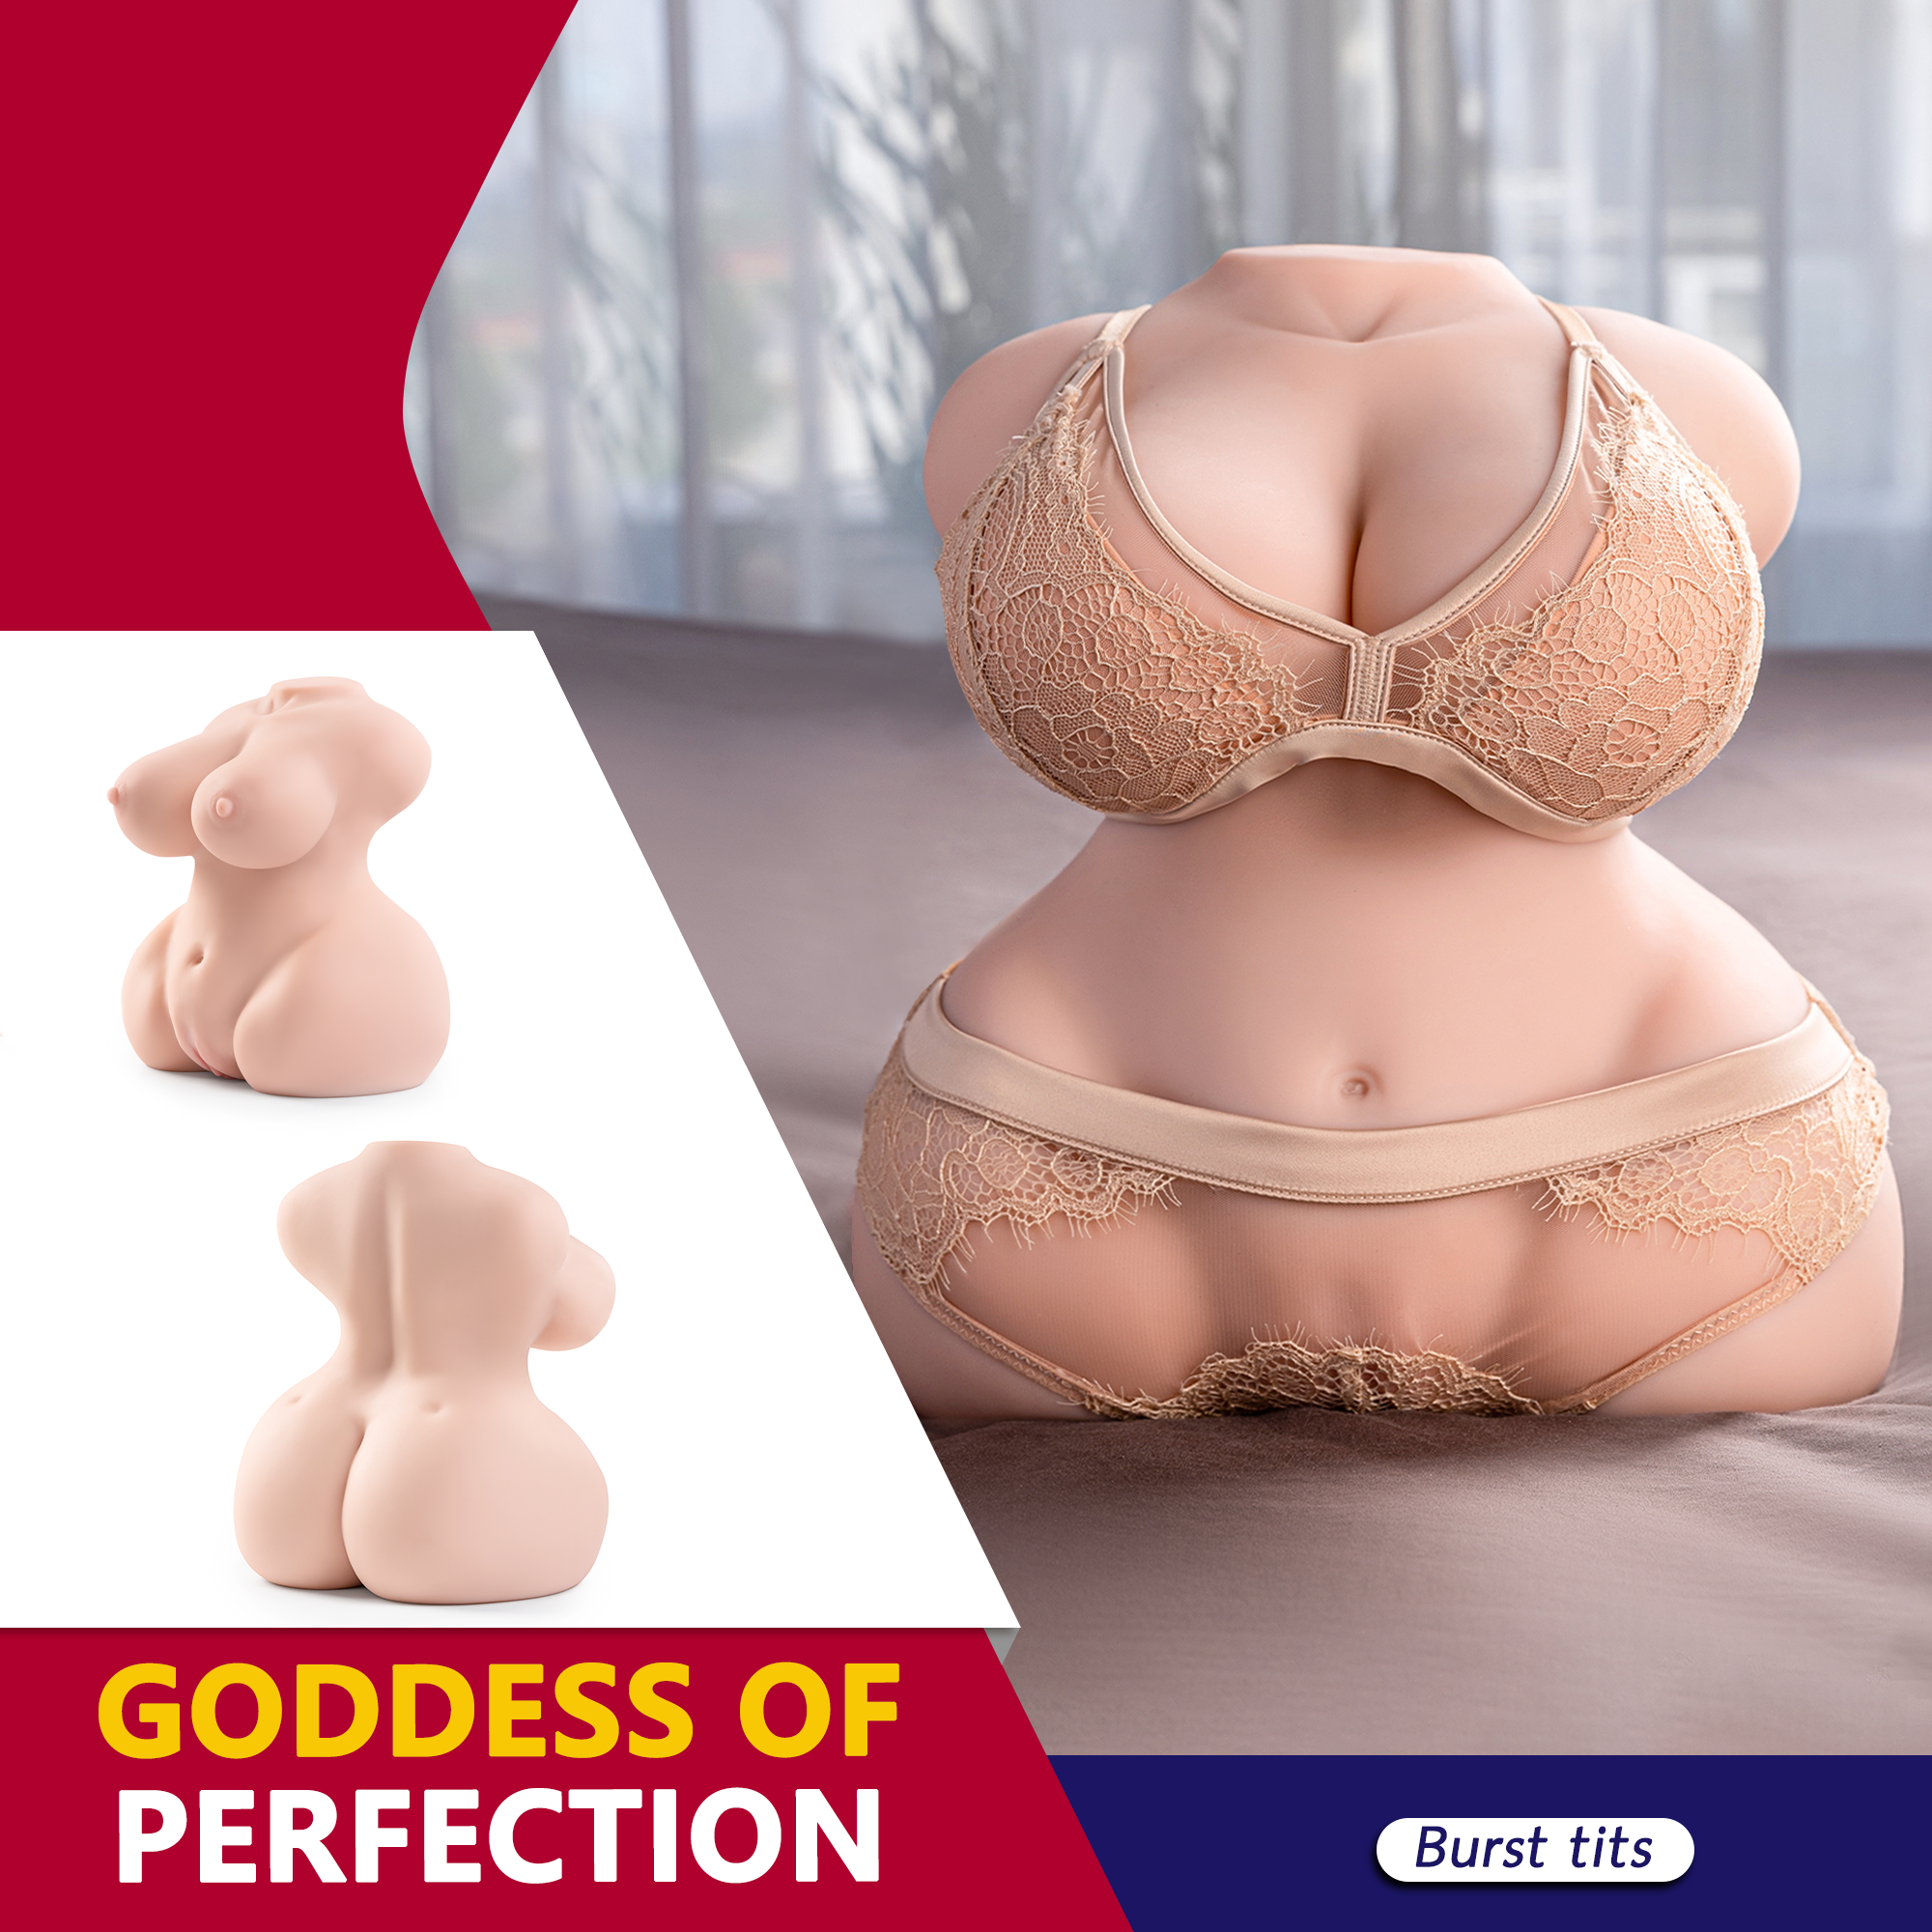 Florence(For EU Customers): 12.1lb Small Sex Doll for Beginners